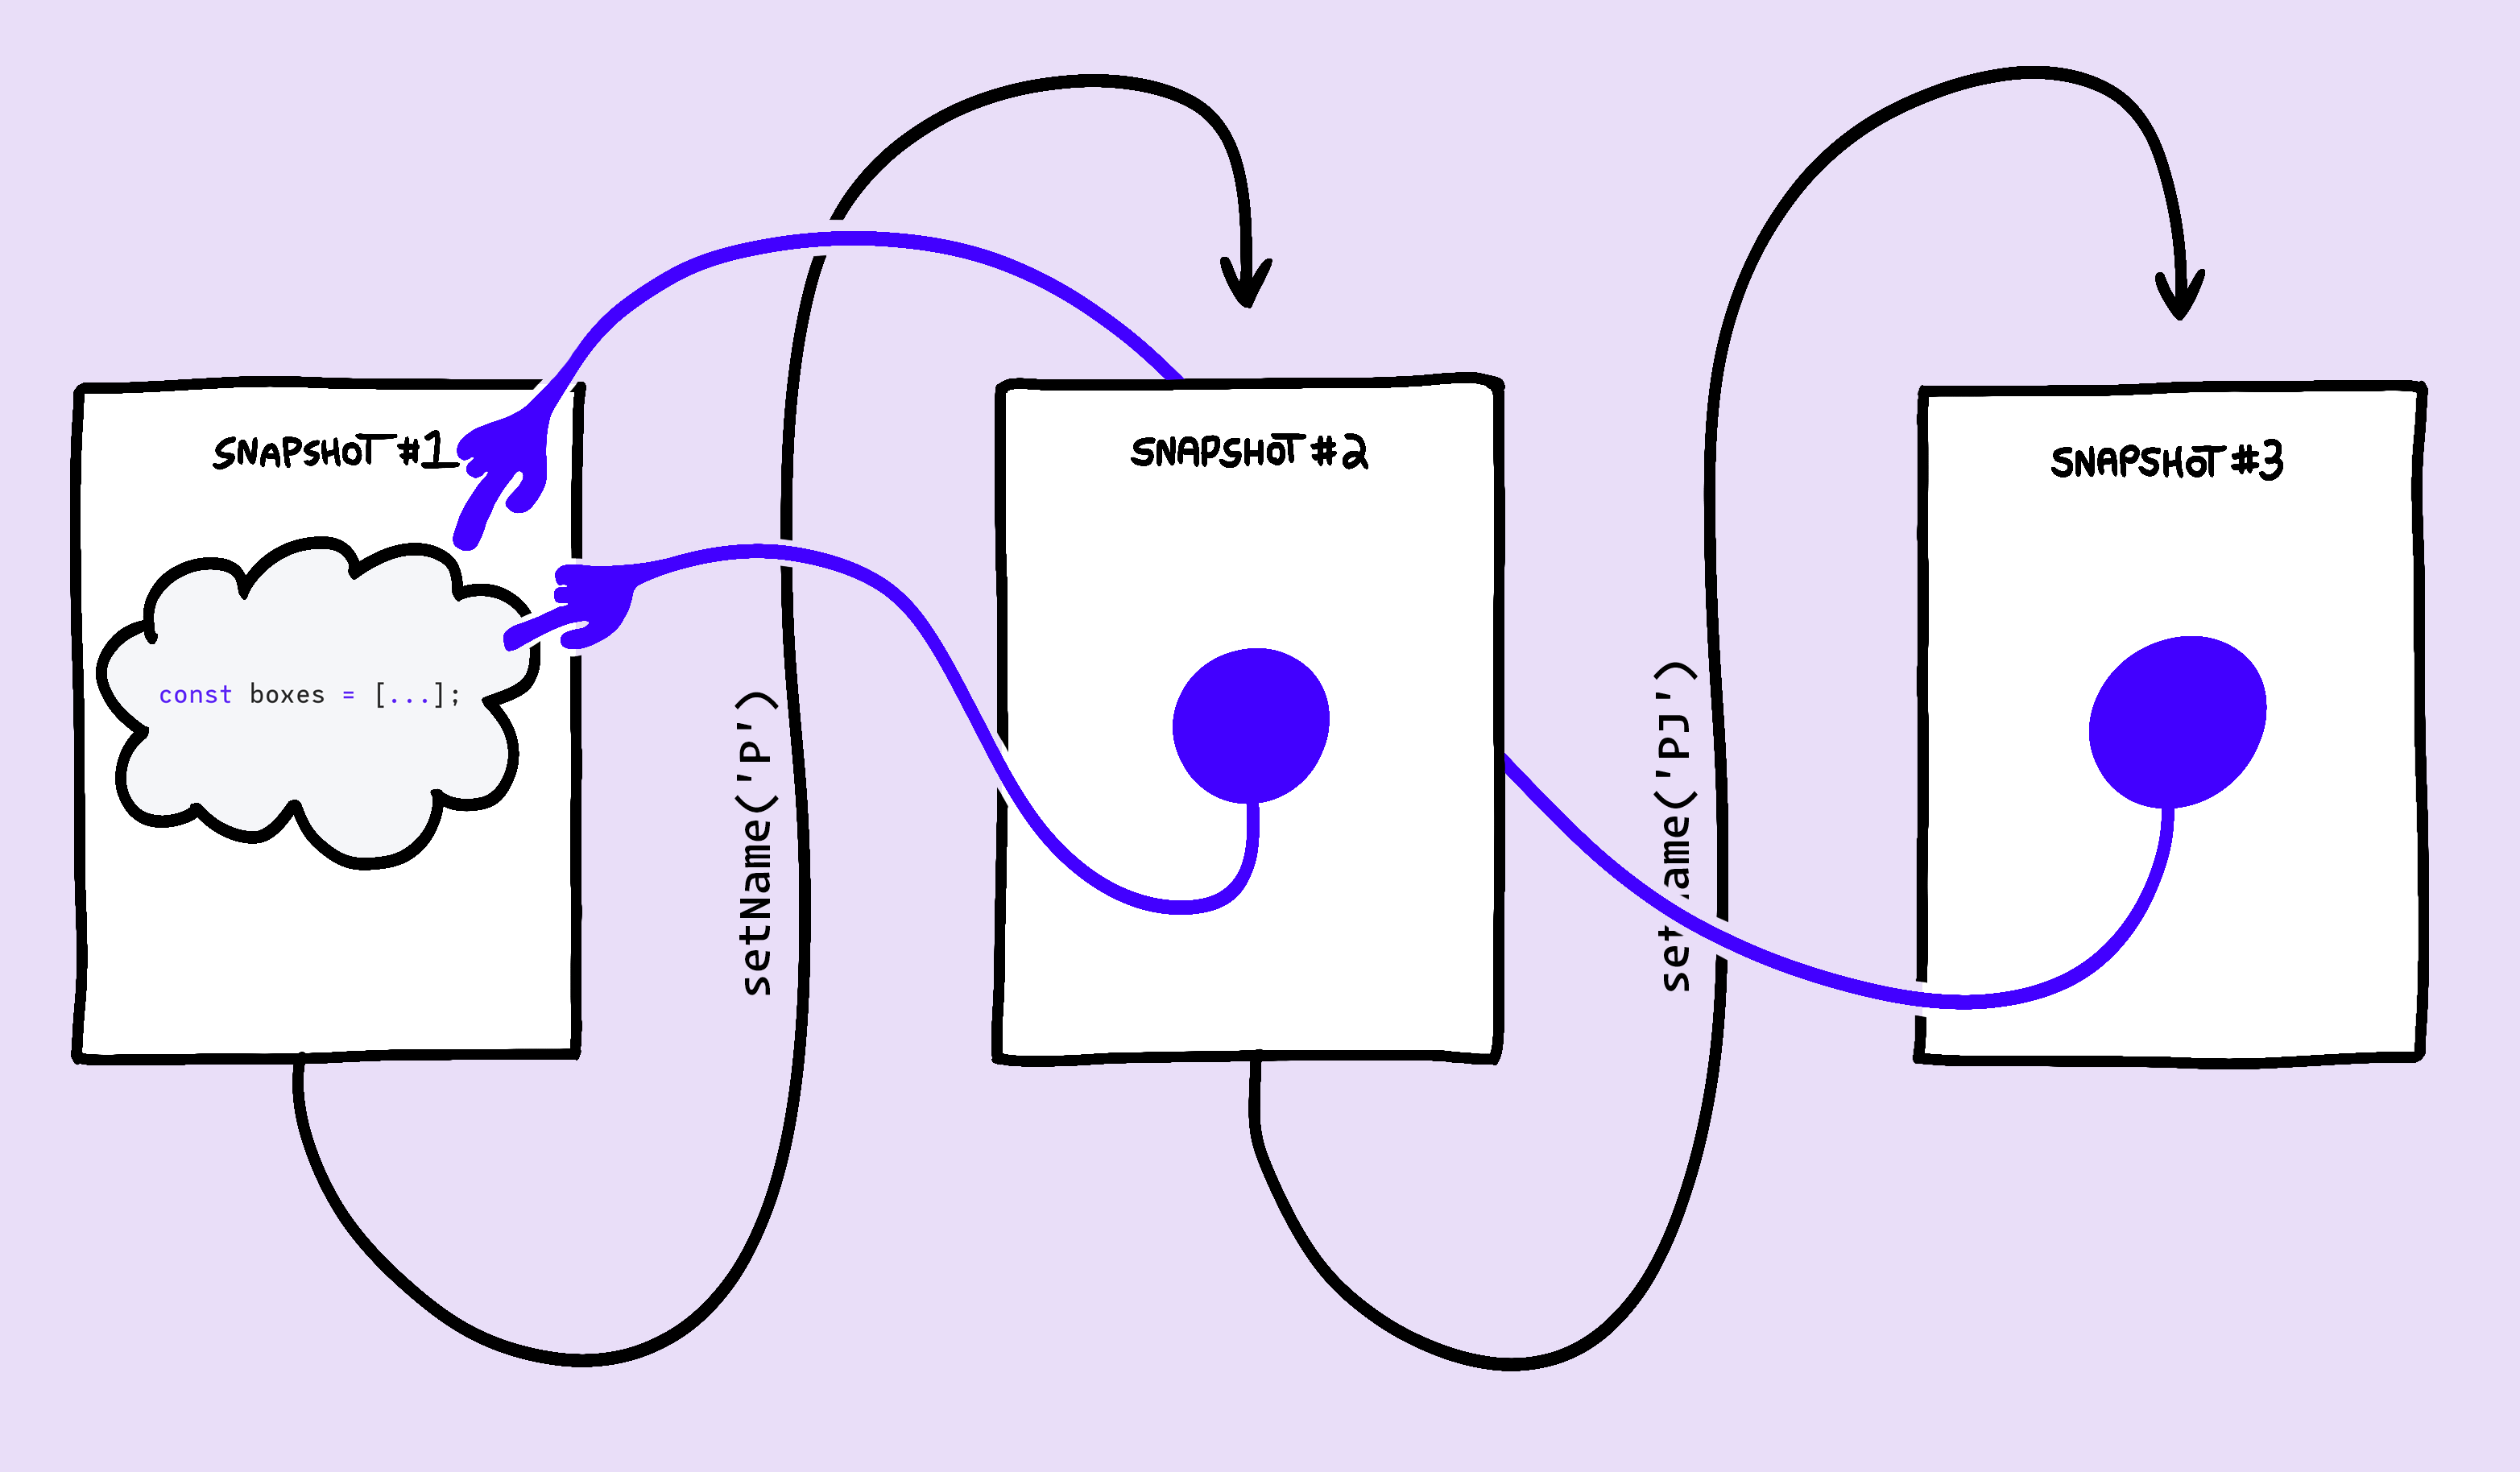 Diagram showing how each snapshot builds a brand new “boxes” array